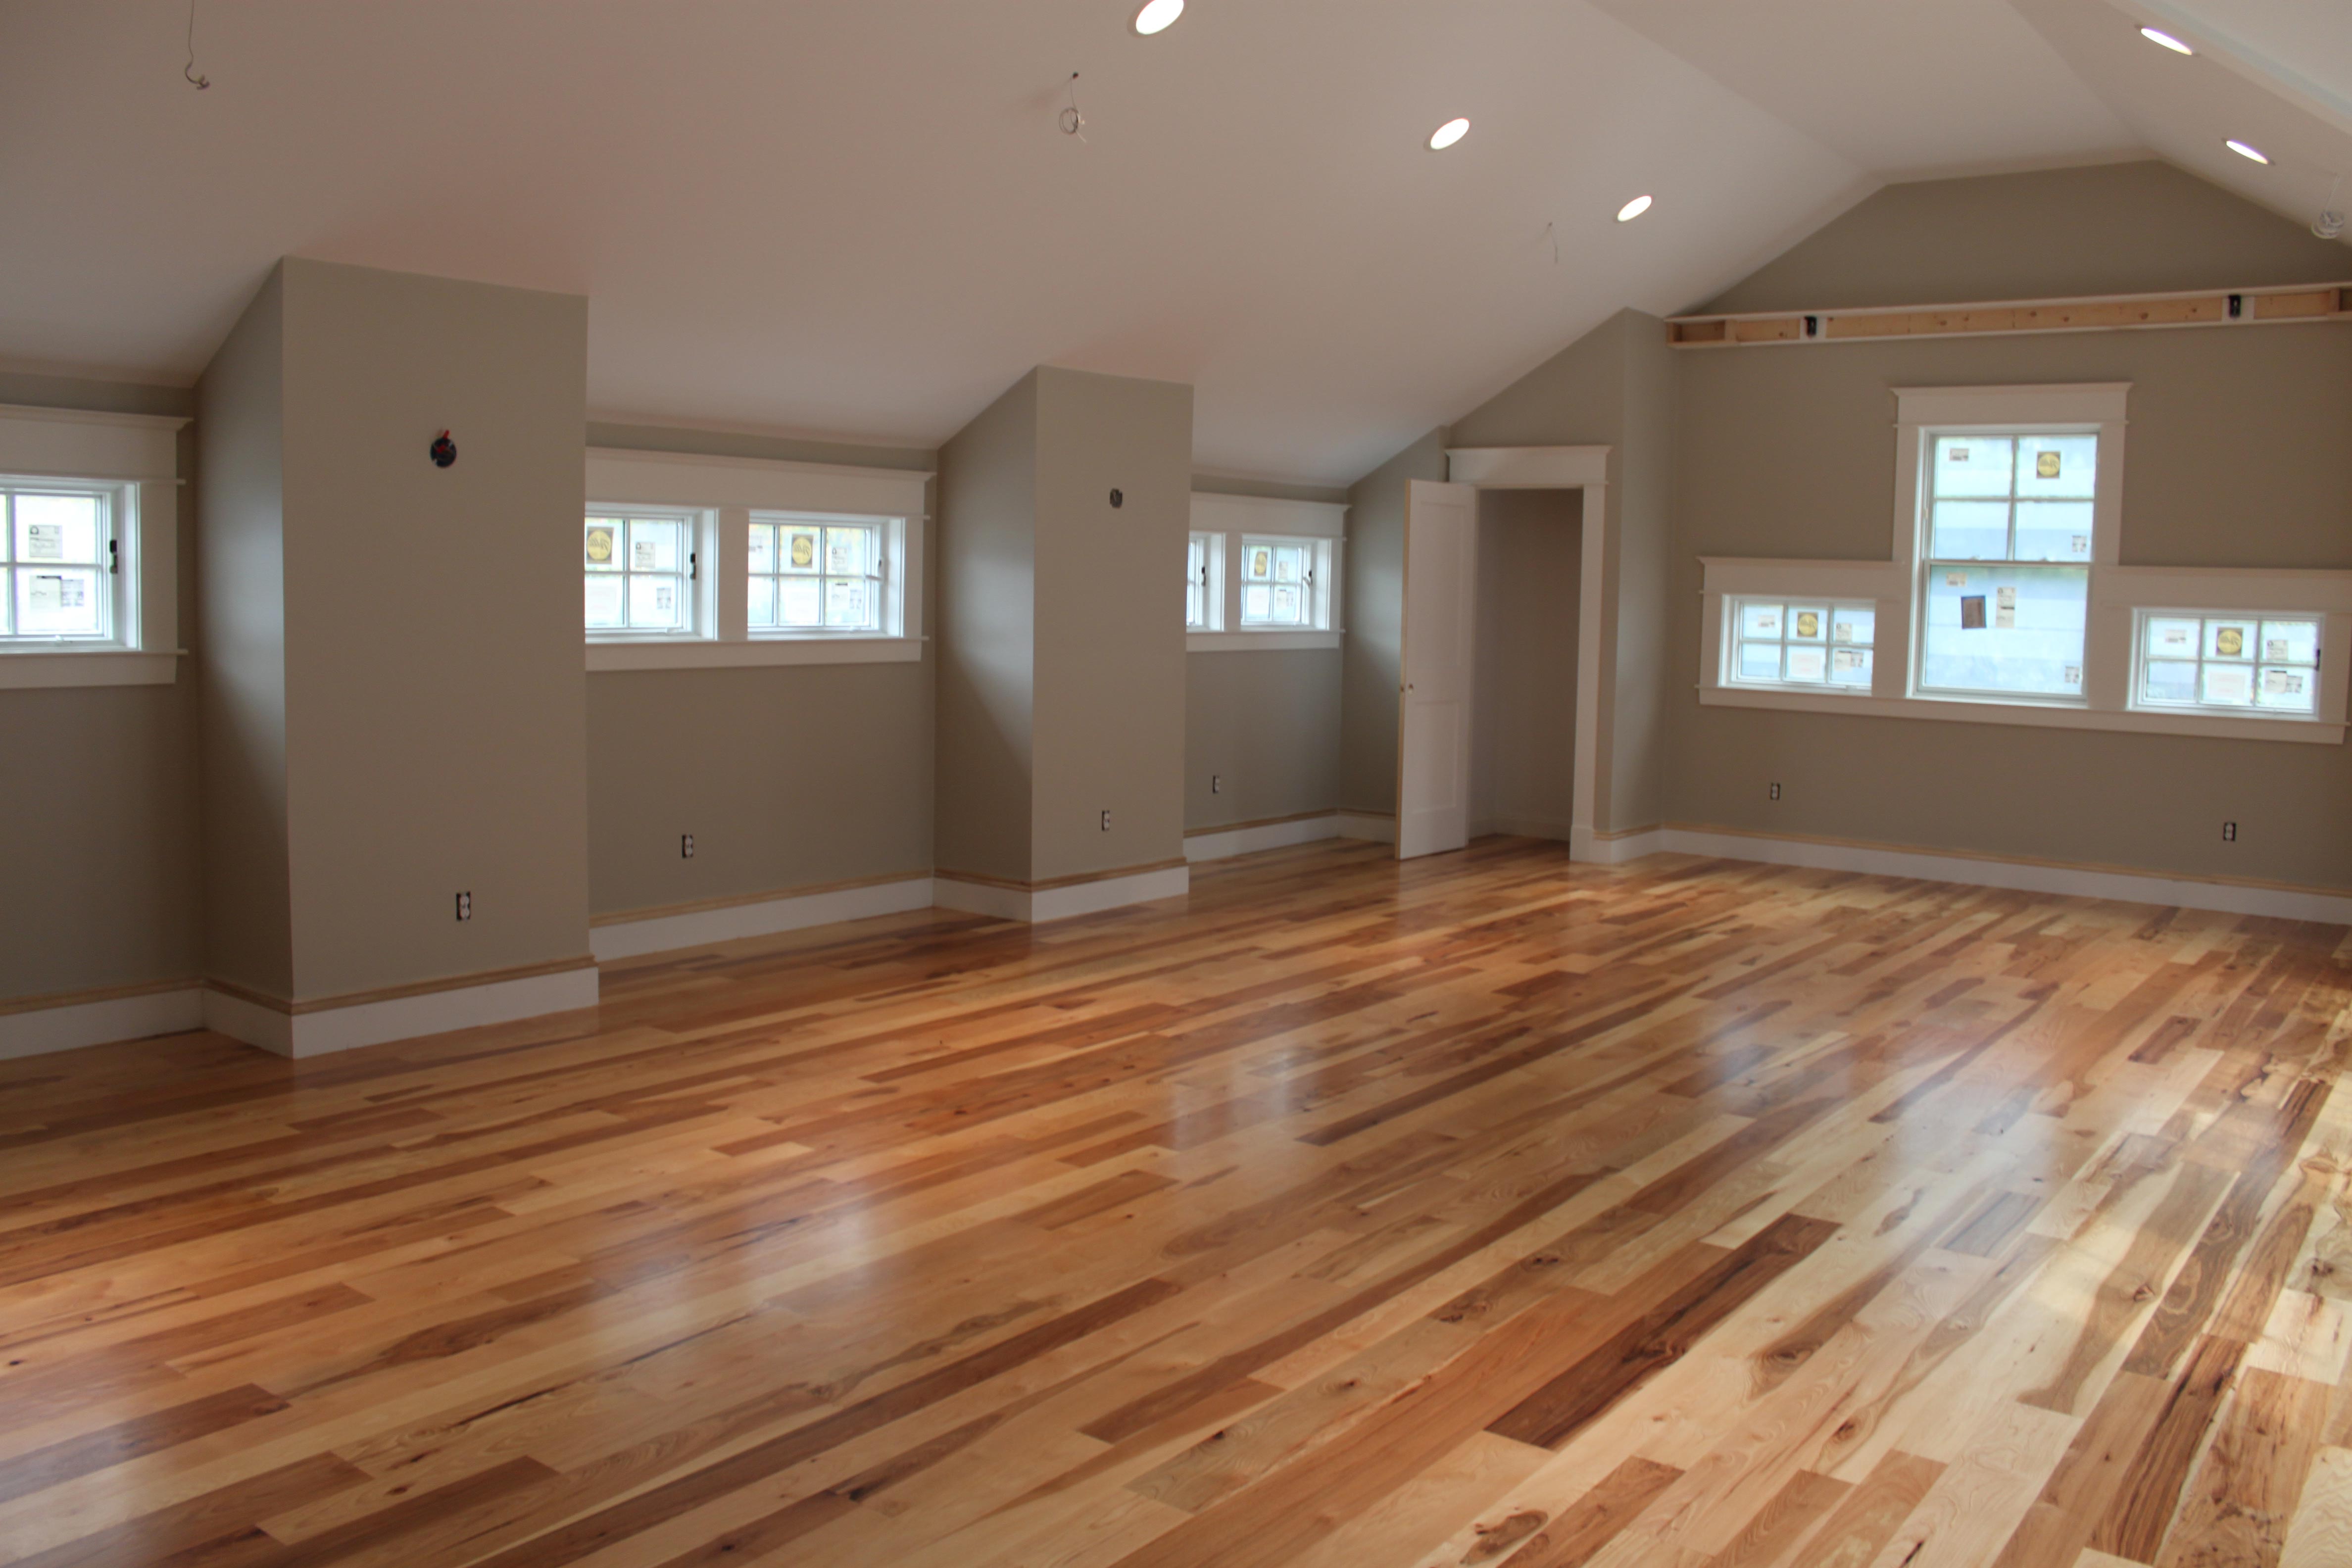 All you need to know about hardwood floors